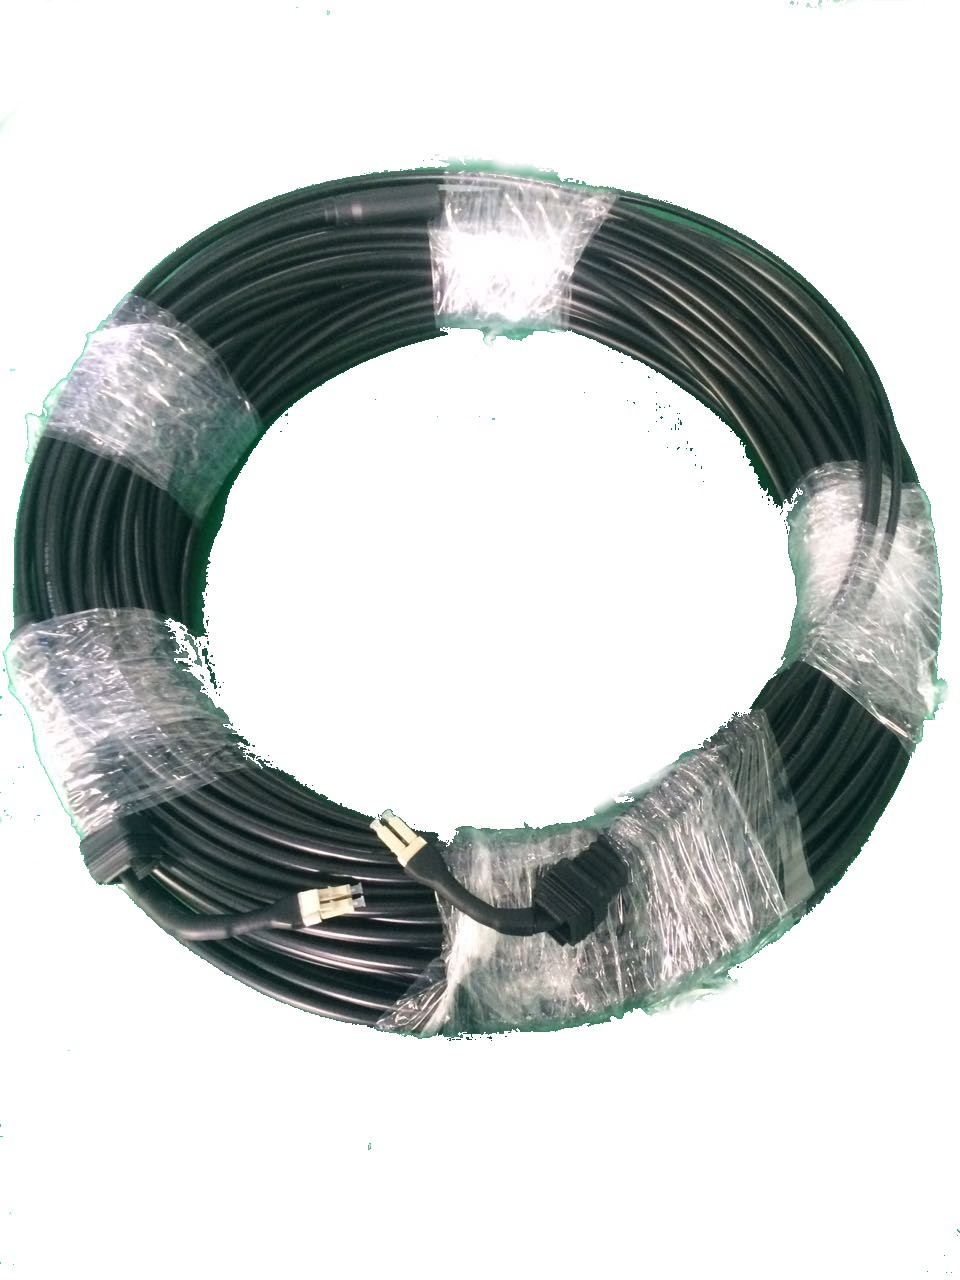 Outdoor fiber patch cord